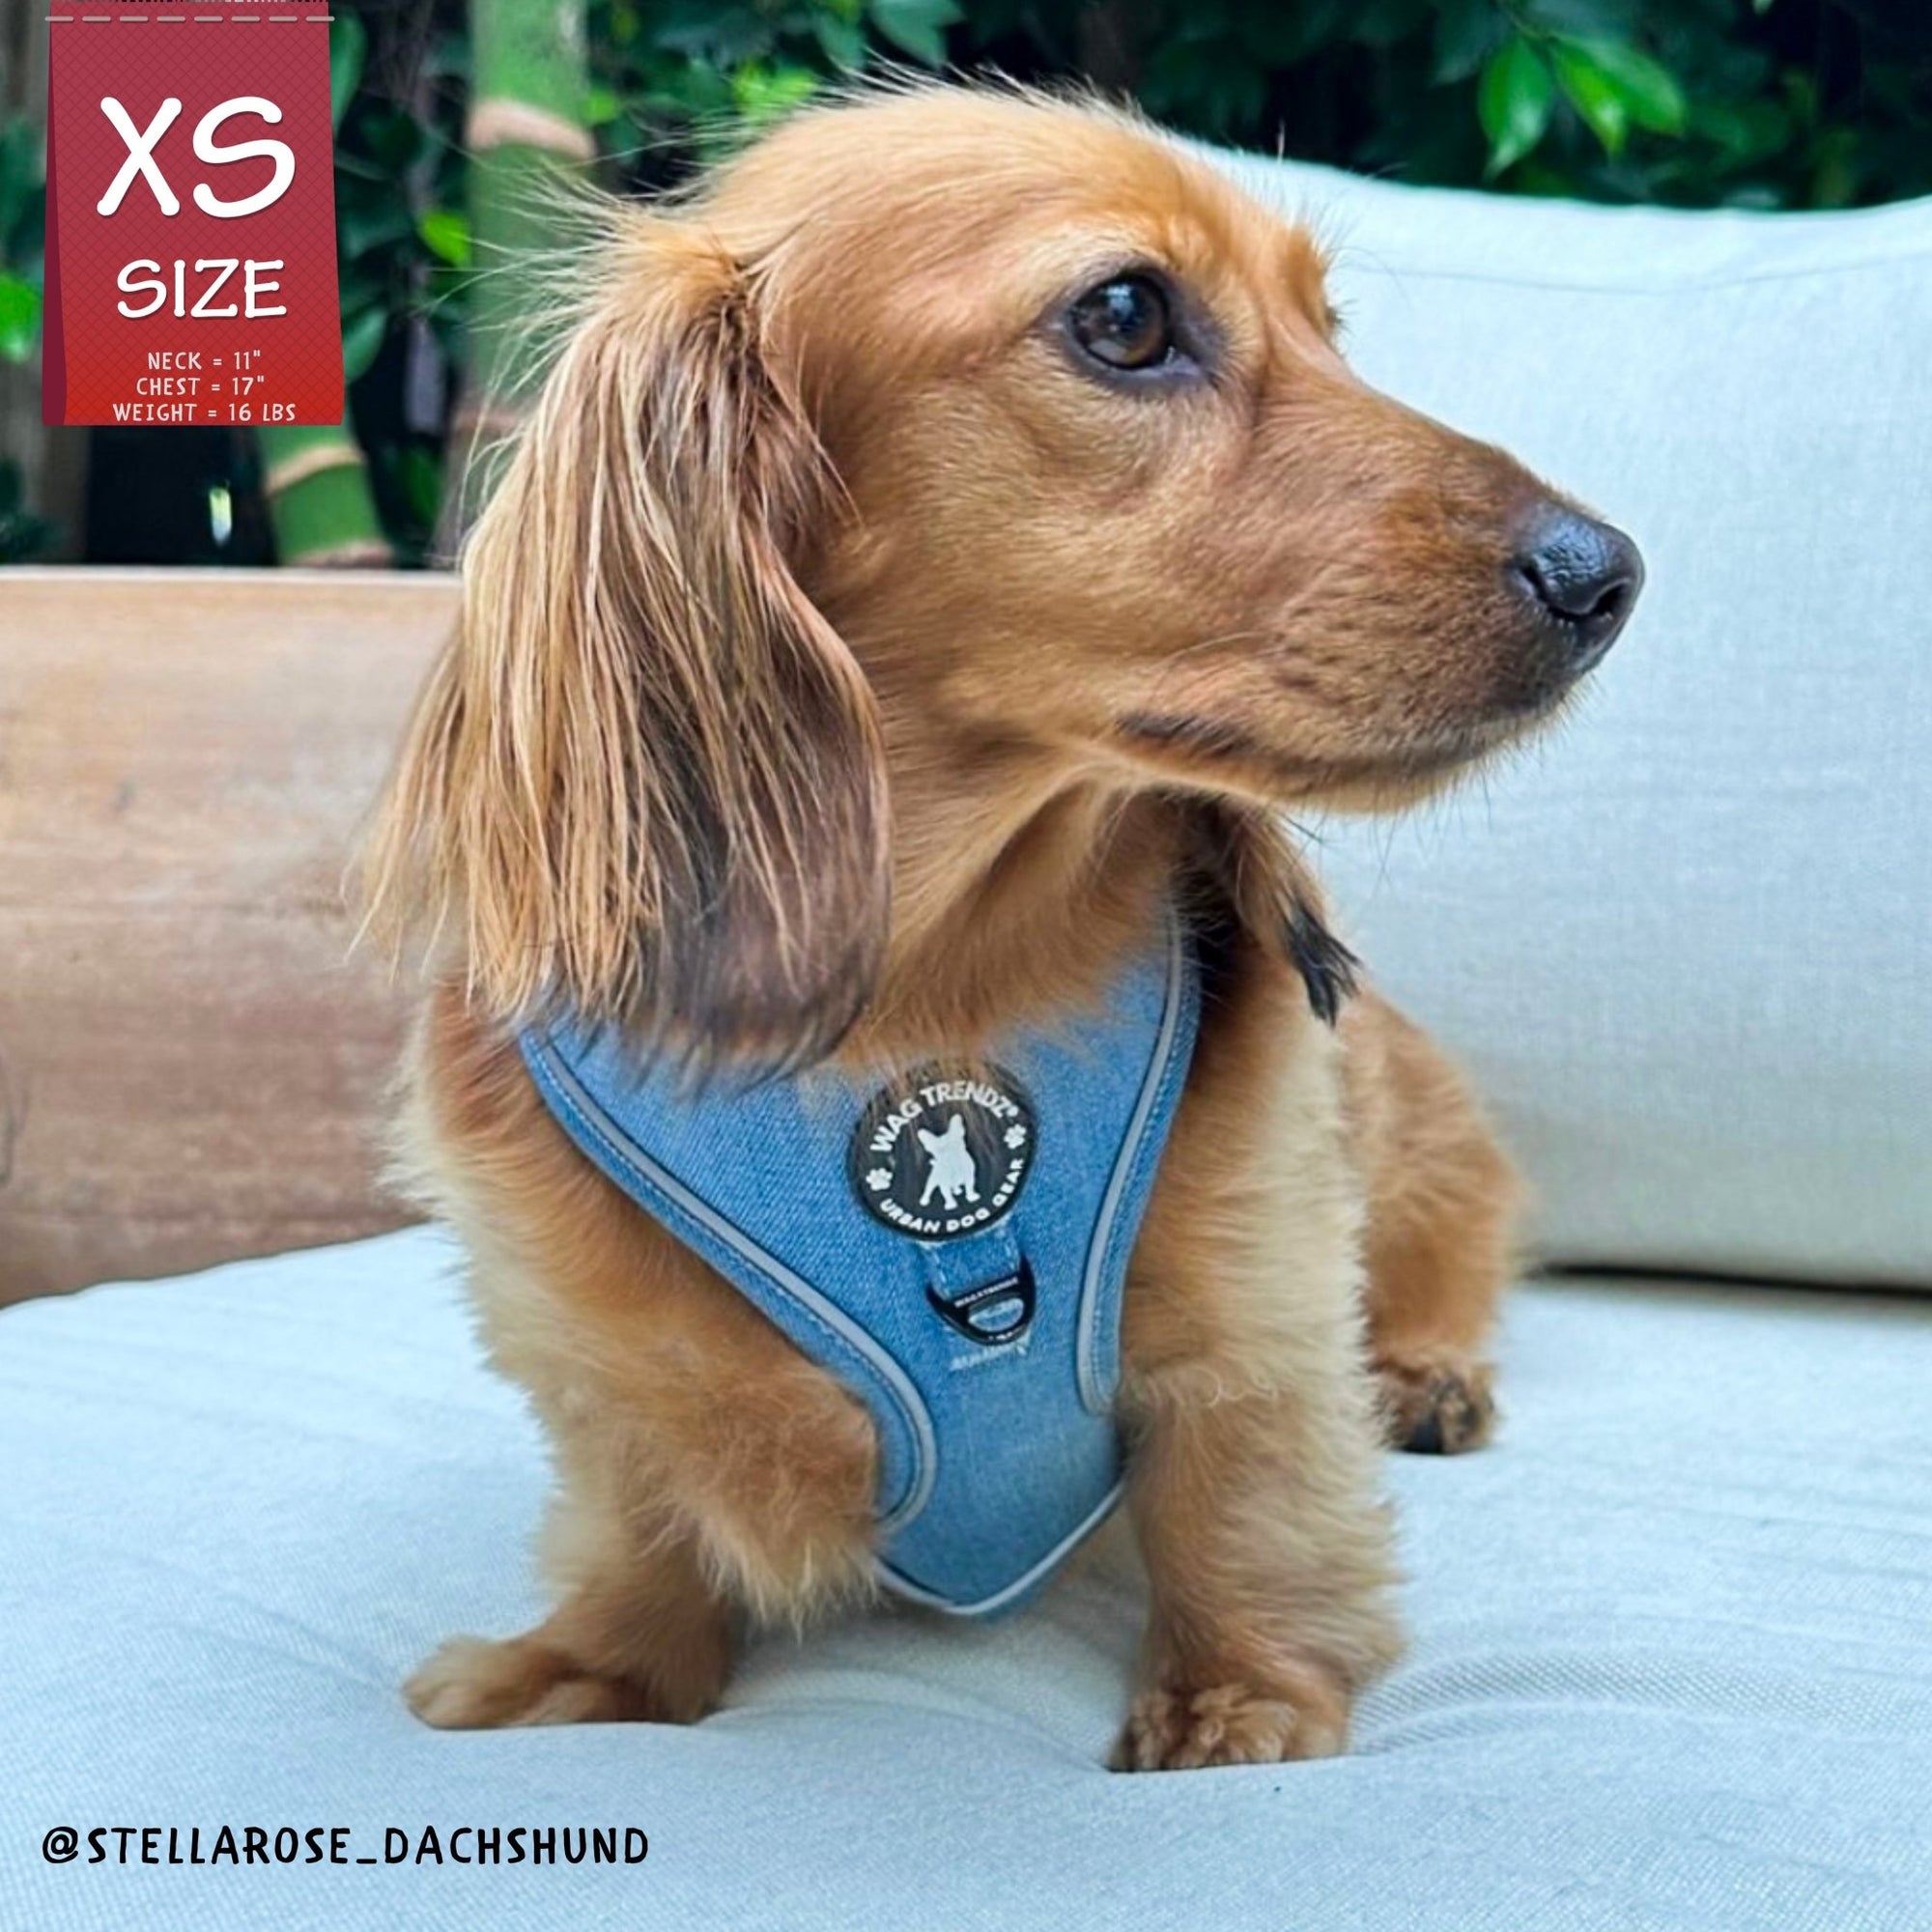 Dog Harness and Leash - Dachshund wearing Downtown Denim Dog Harnesses with reflective accents - sitting on white couch - Wag Trendz